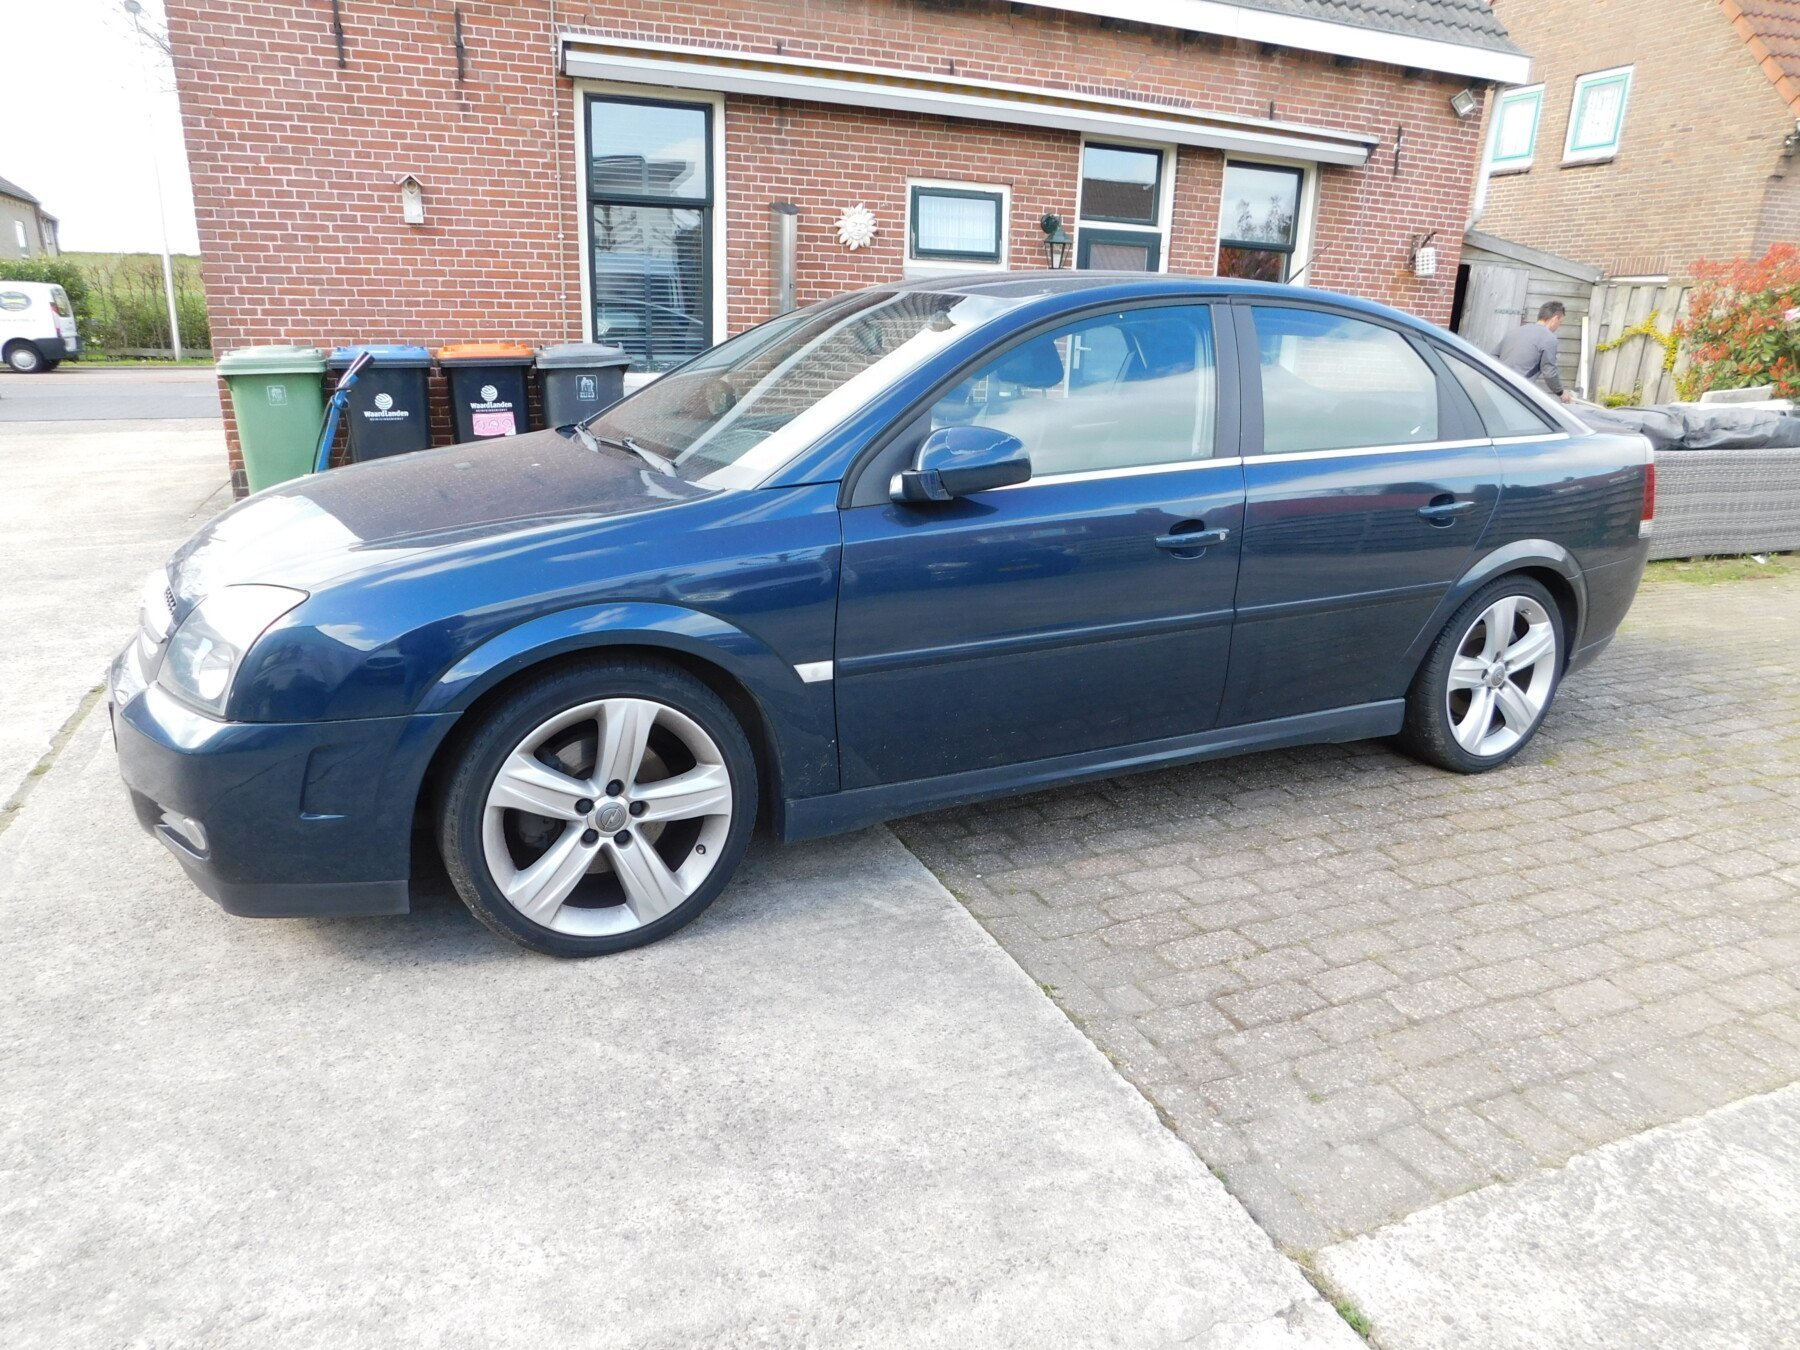 OPEL VECTRA 3.2 6 CIL. AUTOMAAT 2002